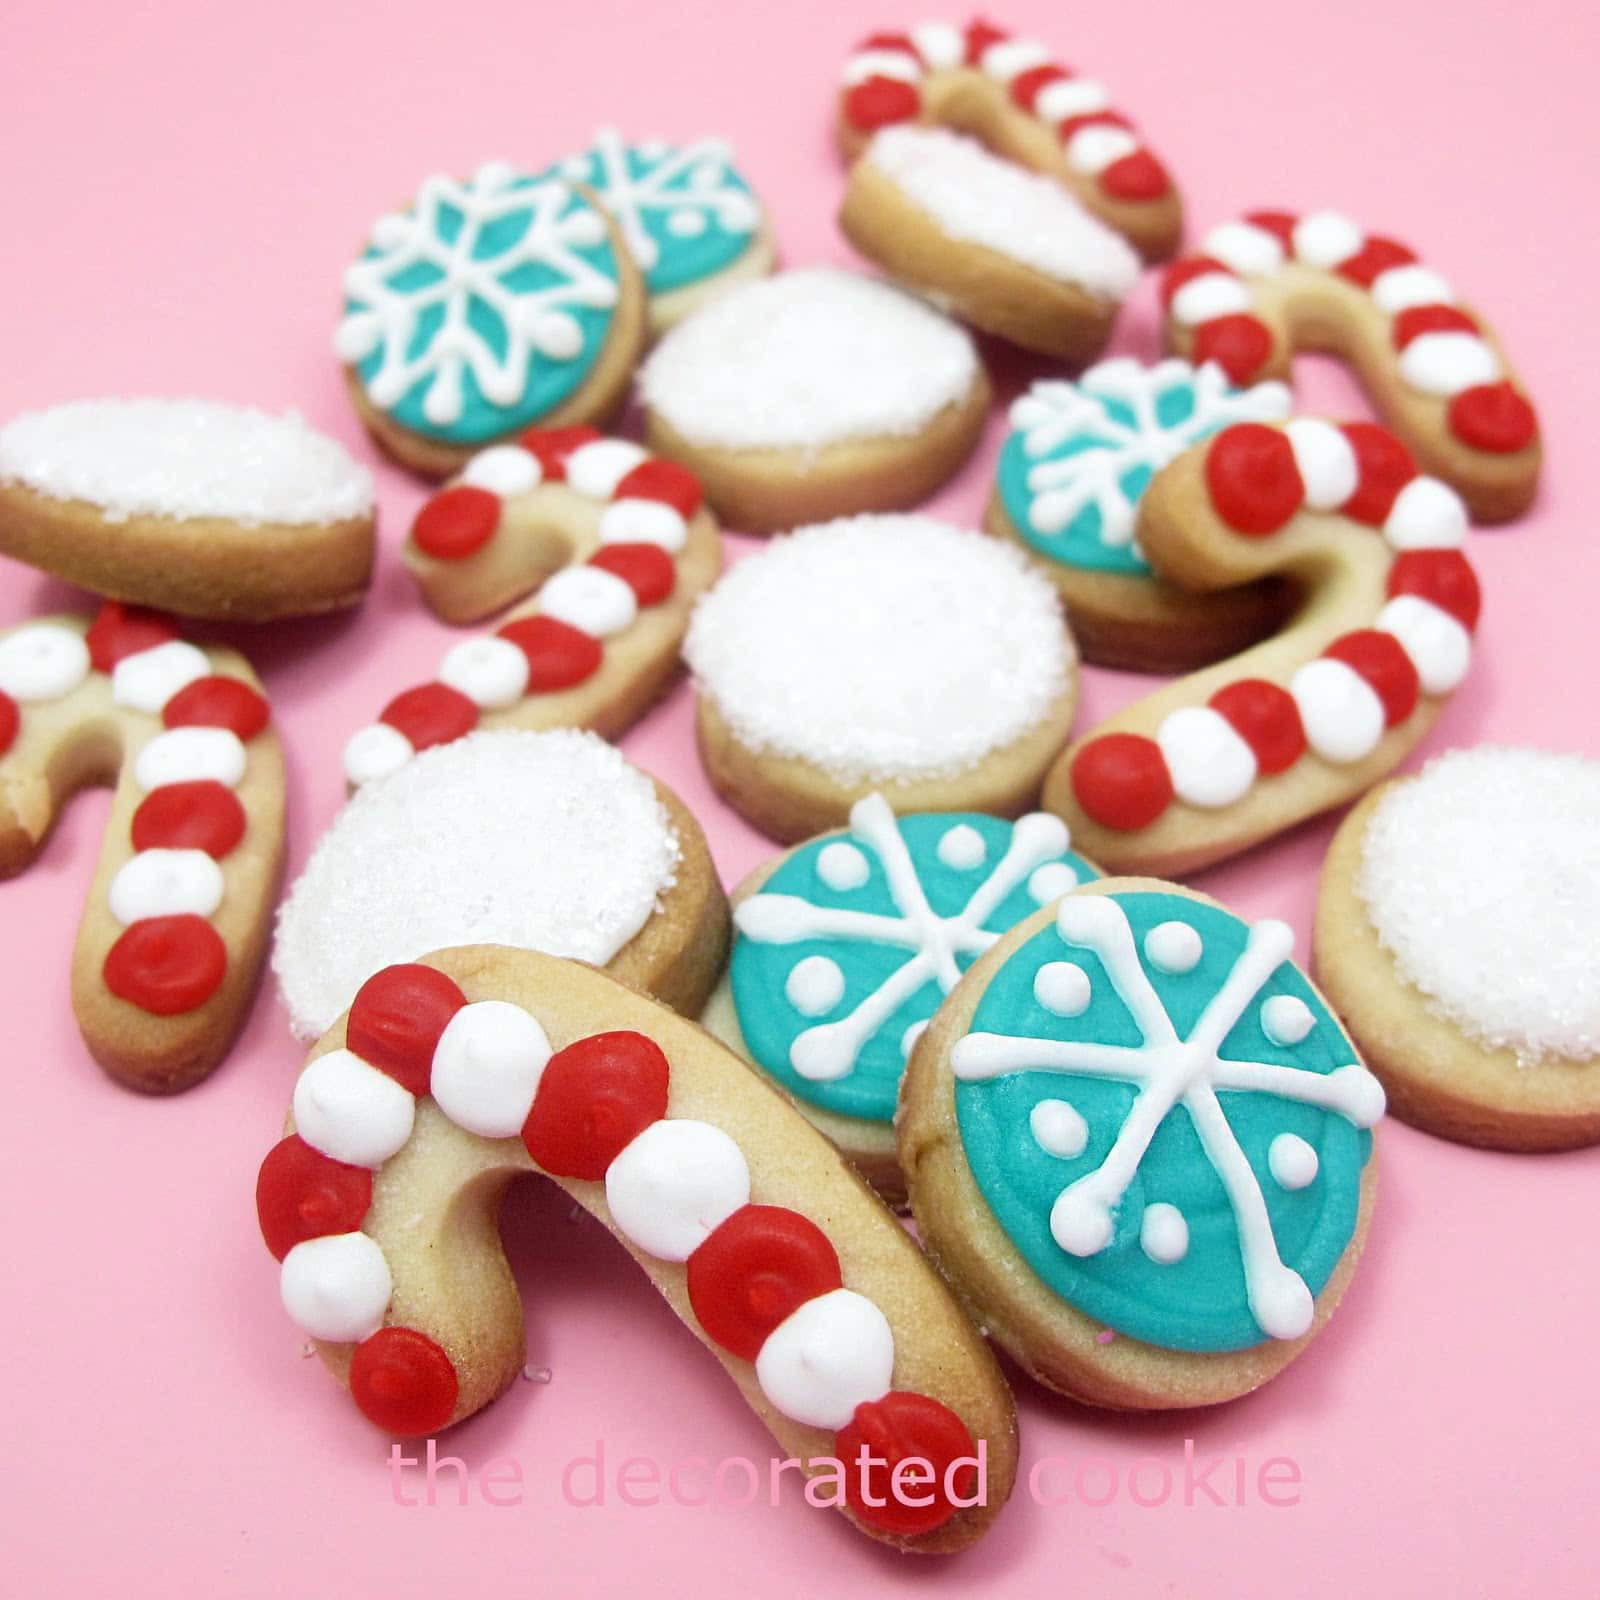 Decorated Christmas Cookies Recipes
 Super cute decorated holiday cookies Christmas cookies in